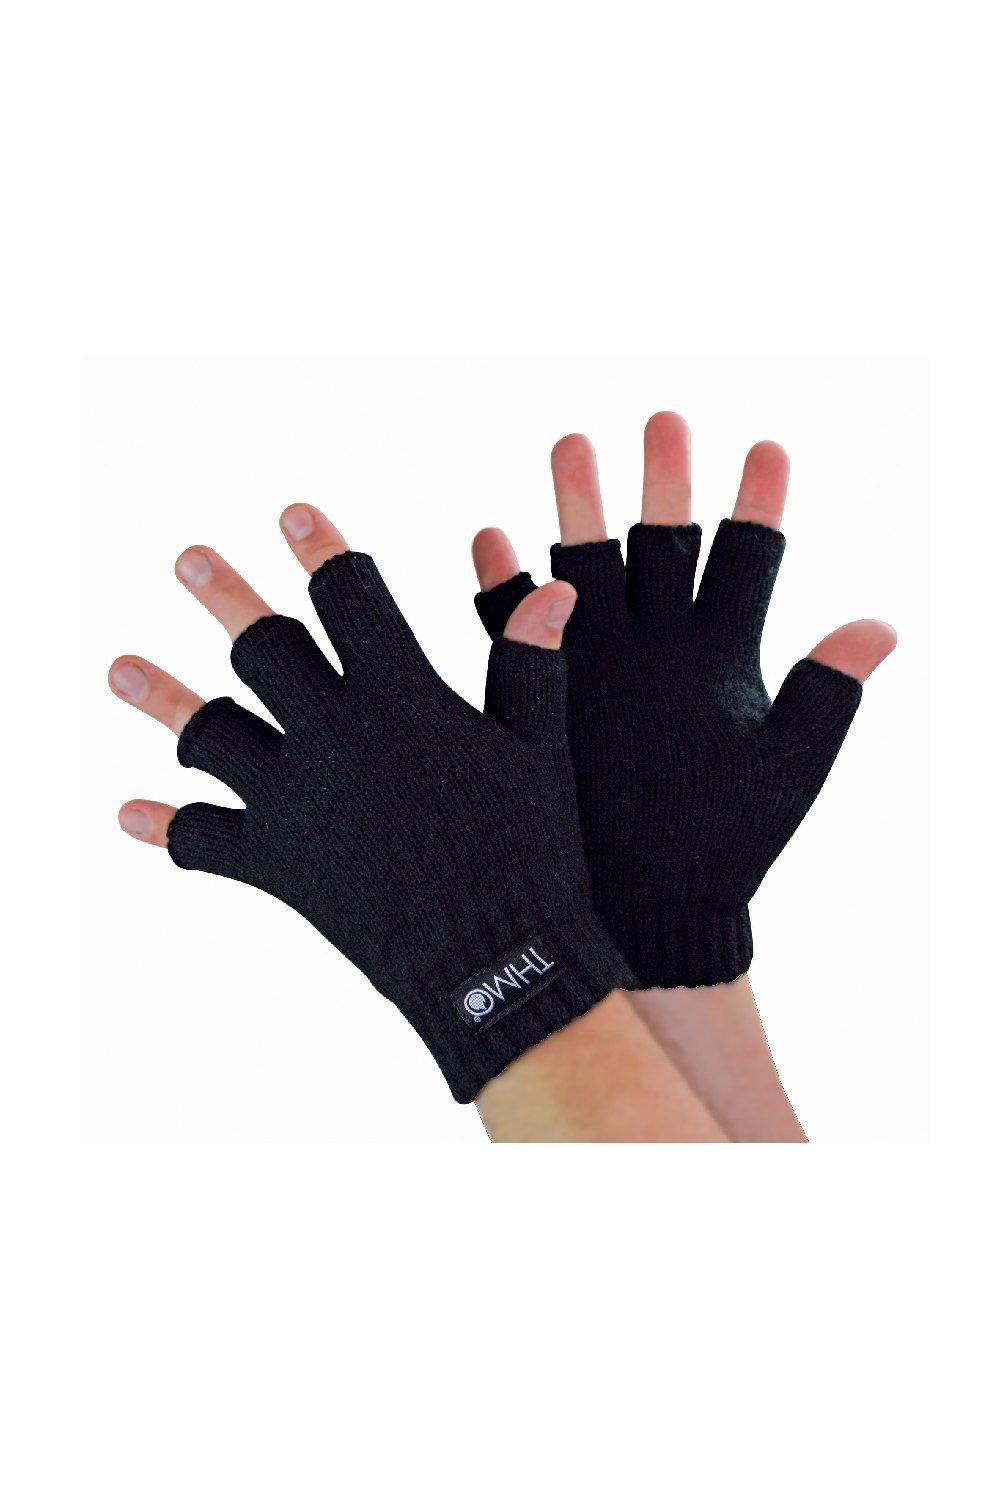 Winter Thermal Warm Fleece Lined Thinsulate Fingerless Gloves